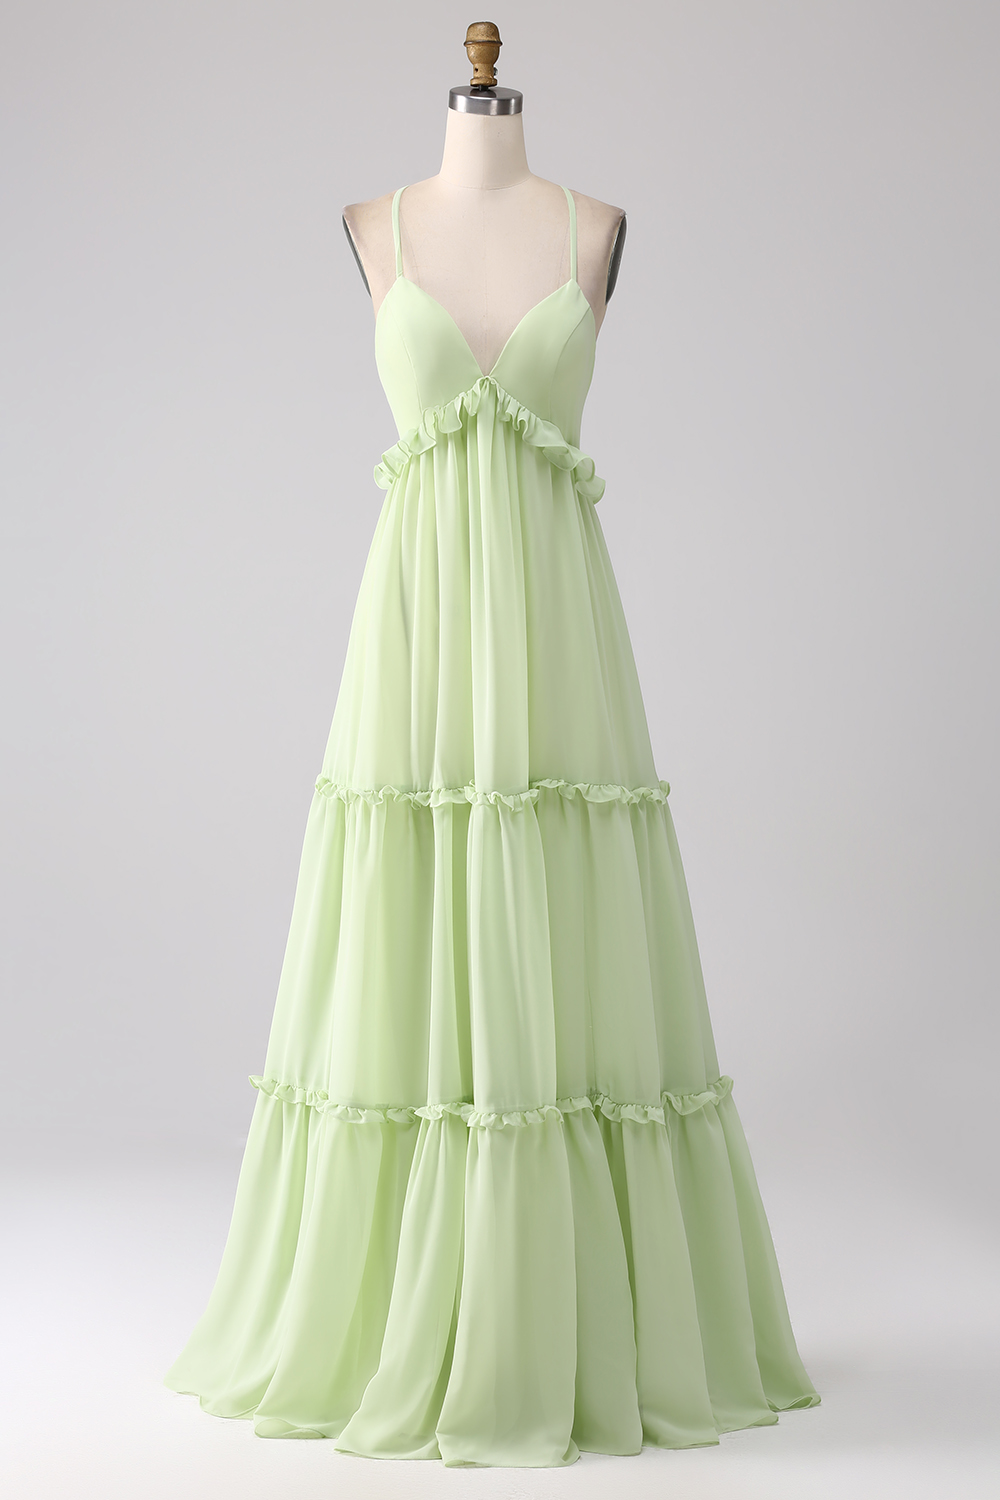 Leely Women Ruffles A Line Green Bridesmaid Dress with Lace-up Back